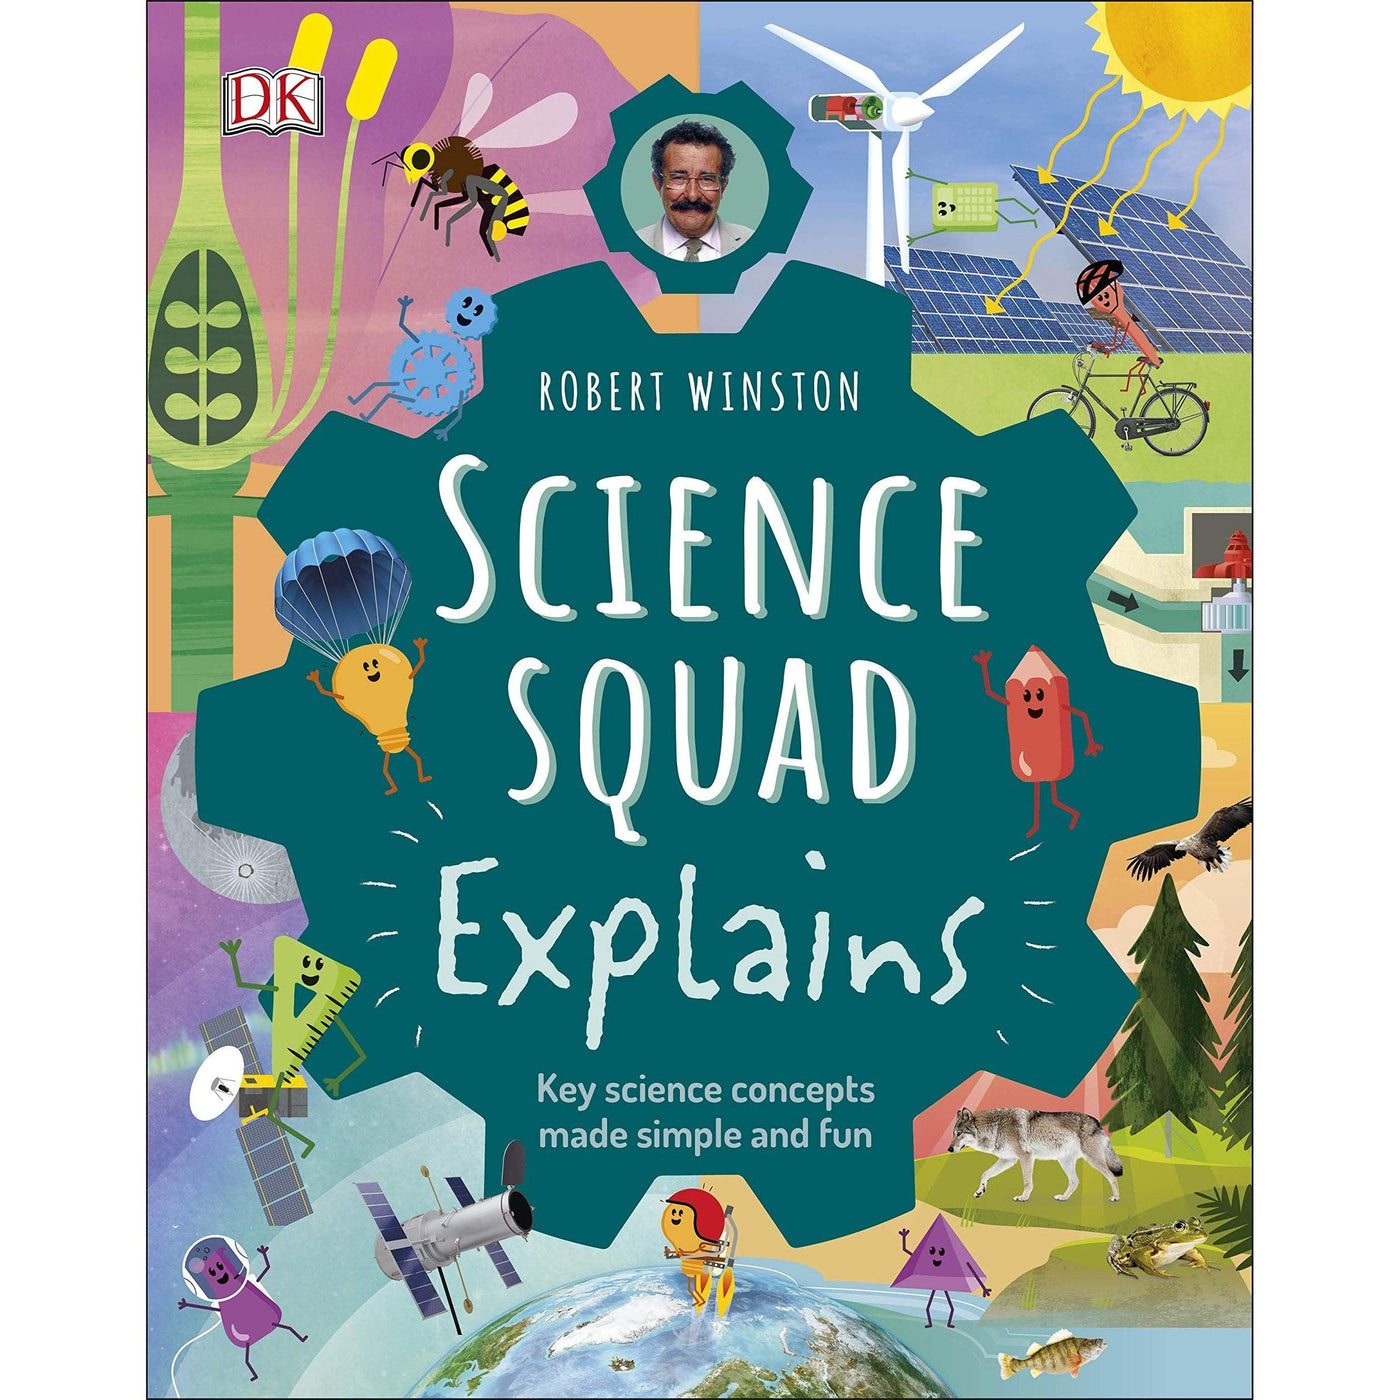 Robert Winston Science Squad Explains: Key science concepts made simple and fun